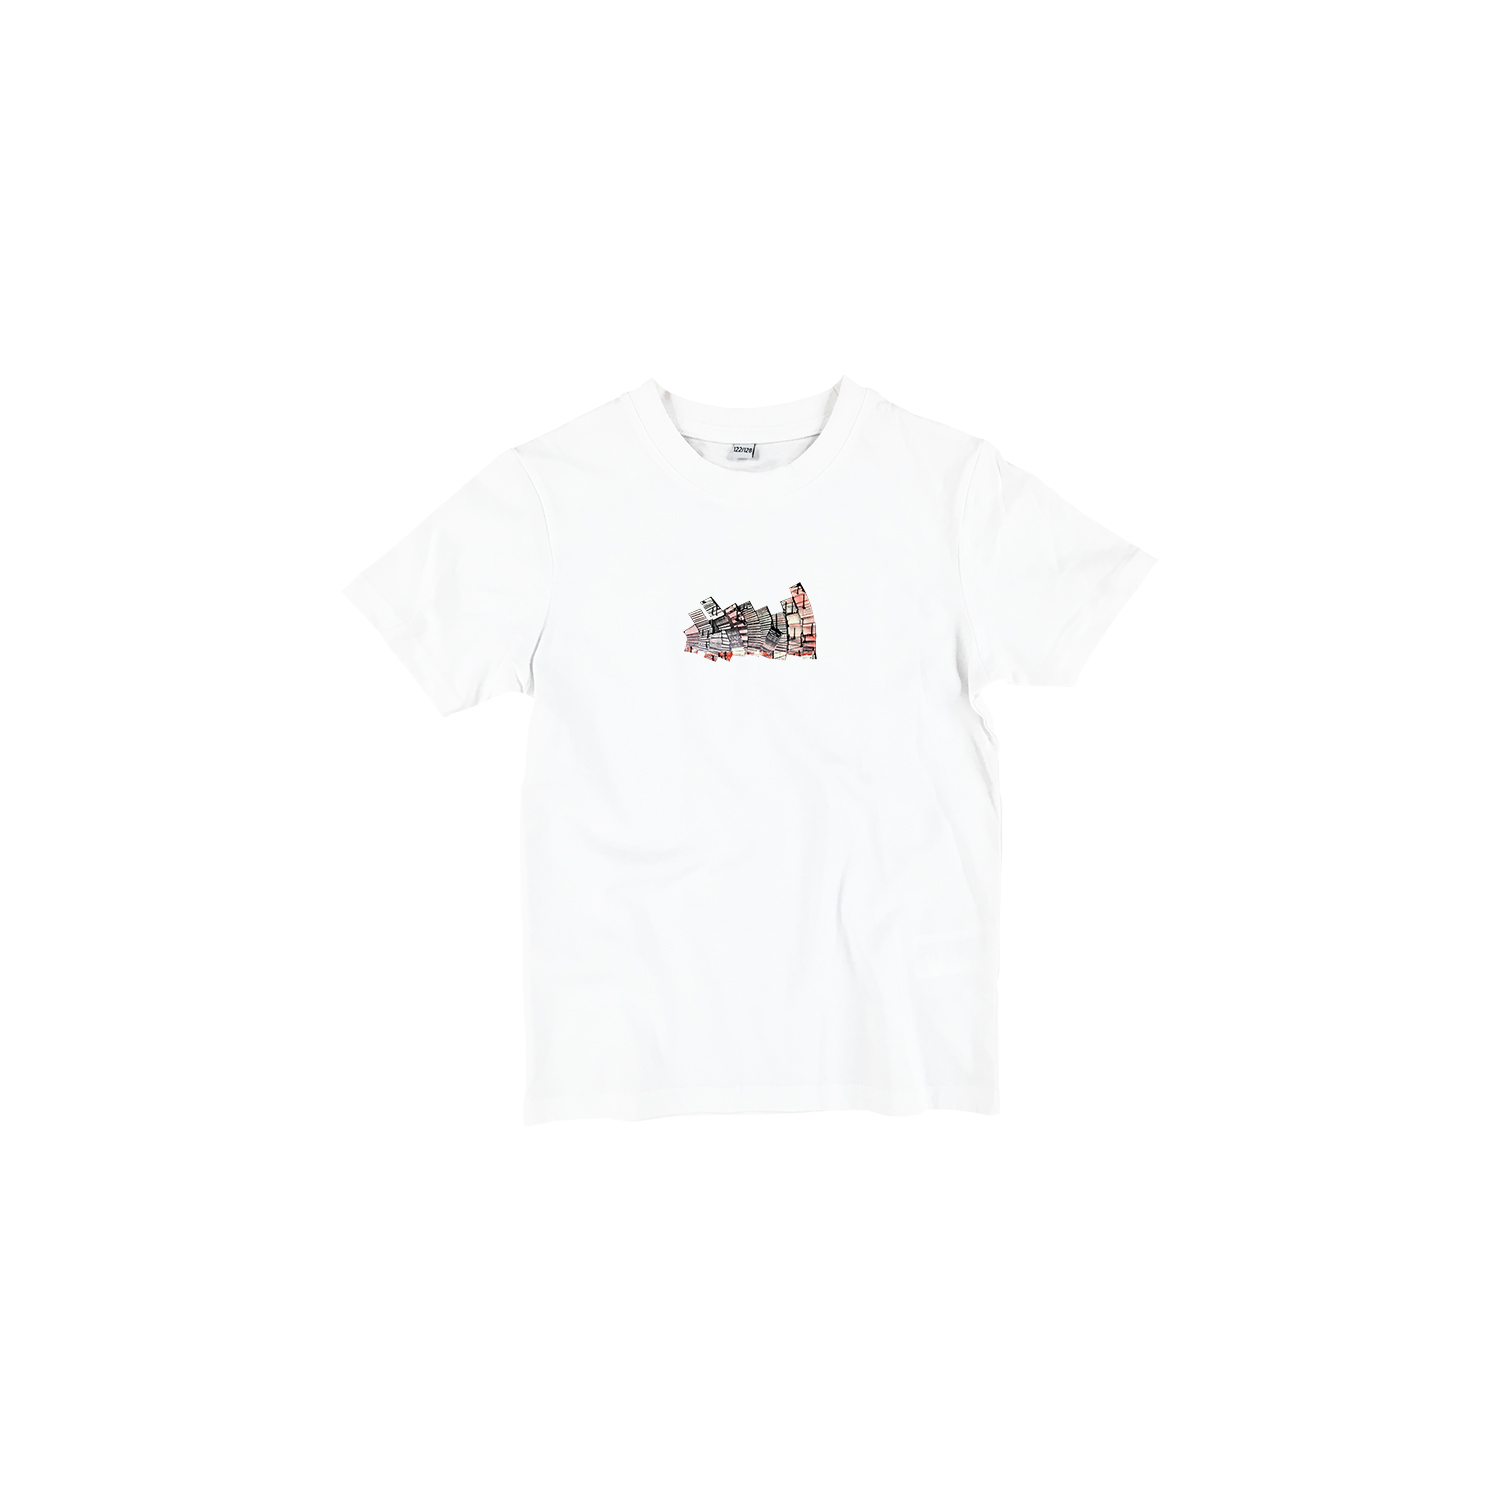 Kids T-shirt - wit - voor - INCLUSIEF-EXCLUSIEF-FLEXIBEL by Ron Vogels - ONE AND ONE MAKES TWO